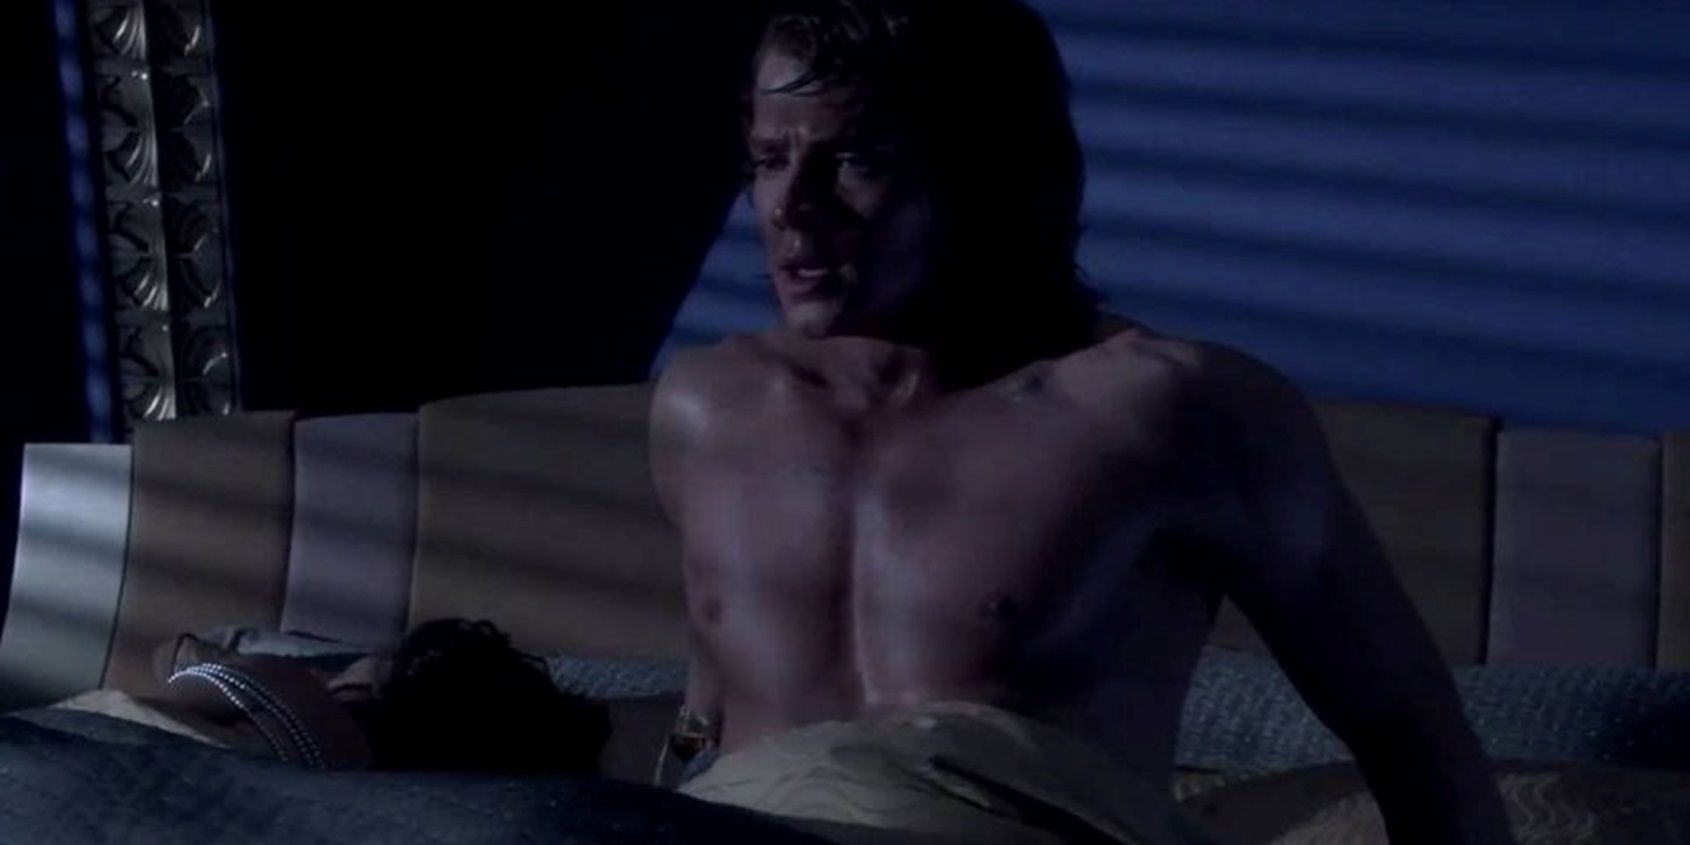 Anakin wakes up in the middle of the night in Revenge of the Sith